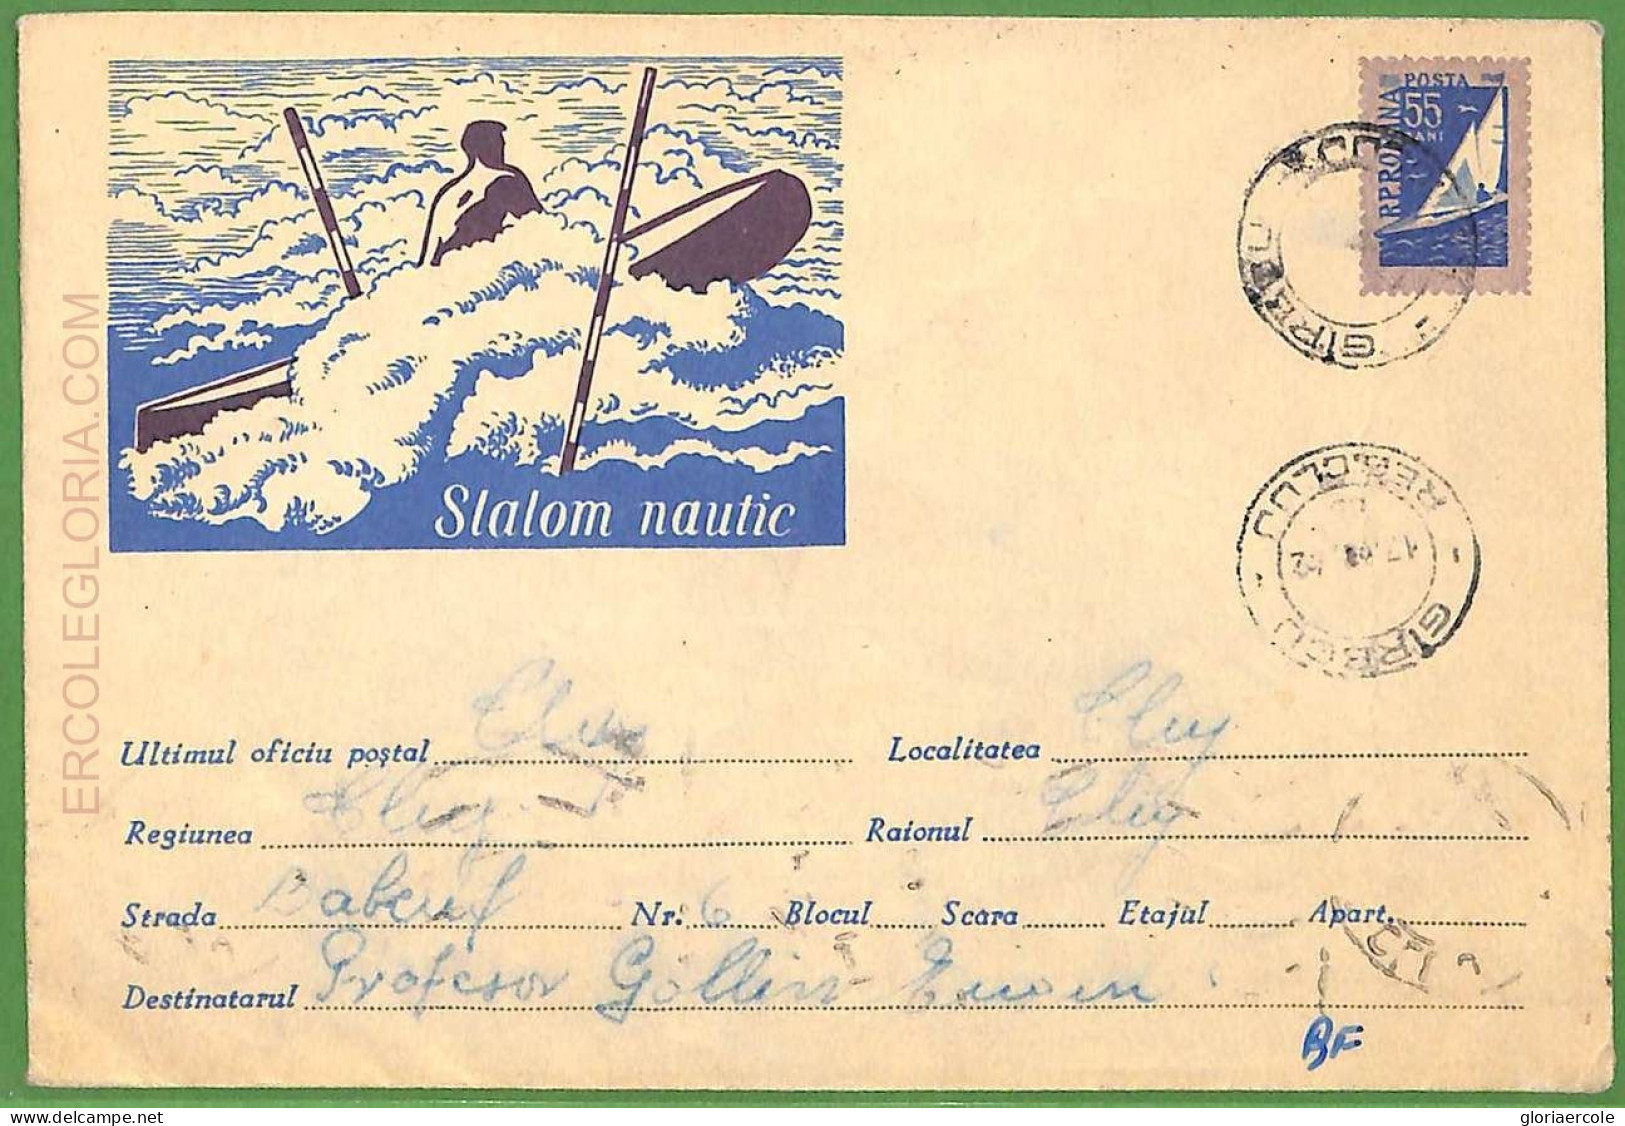 Af3782  - ROMANIA - POSTAL HISTORY - Postal Stationery Cover - ROWING Canoes - Canoa